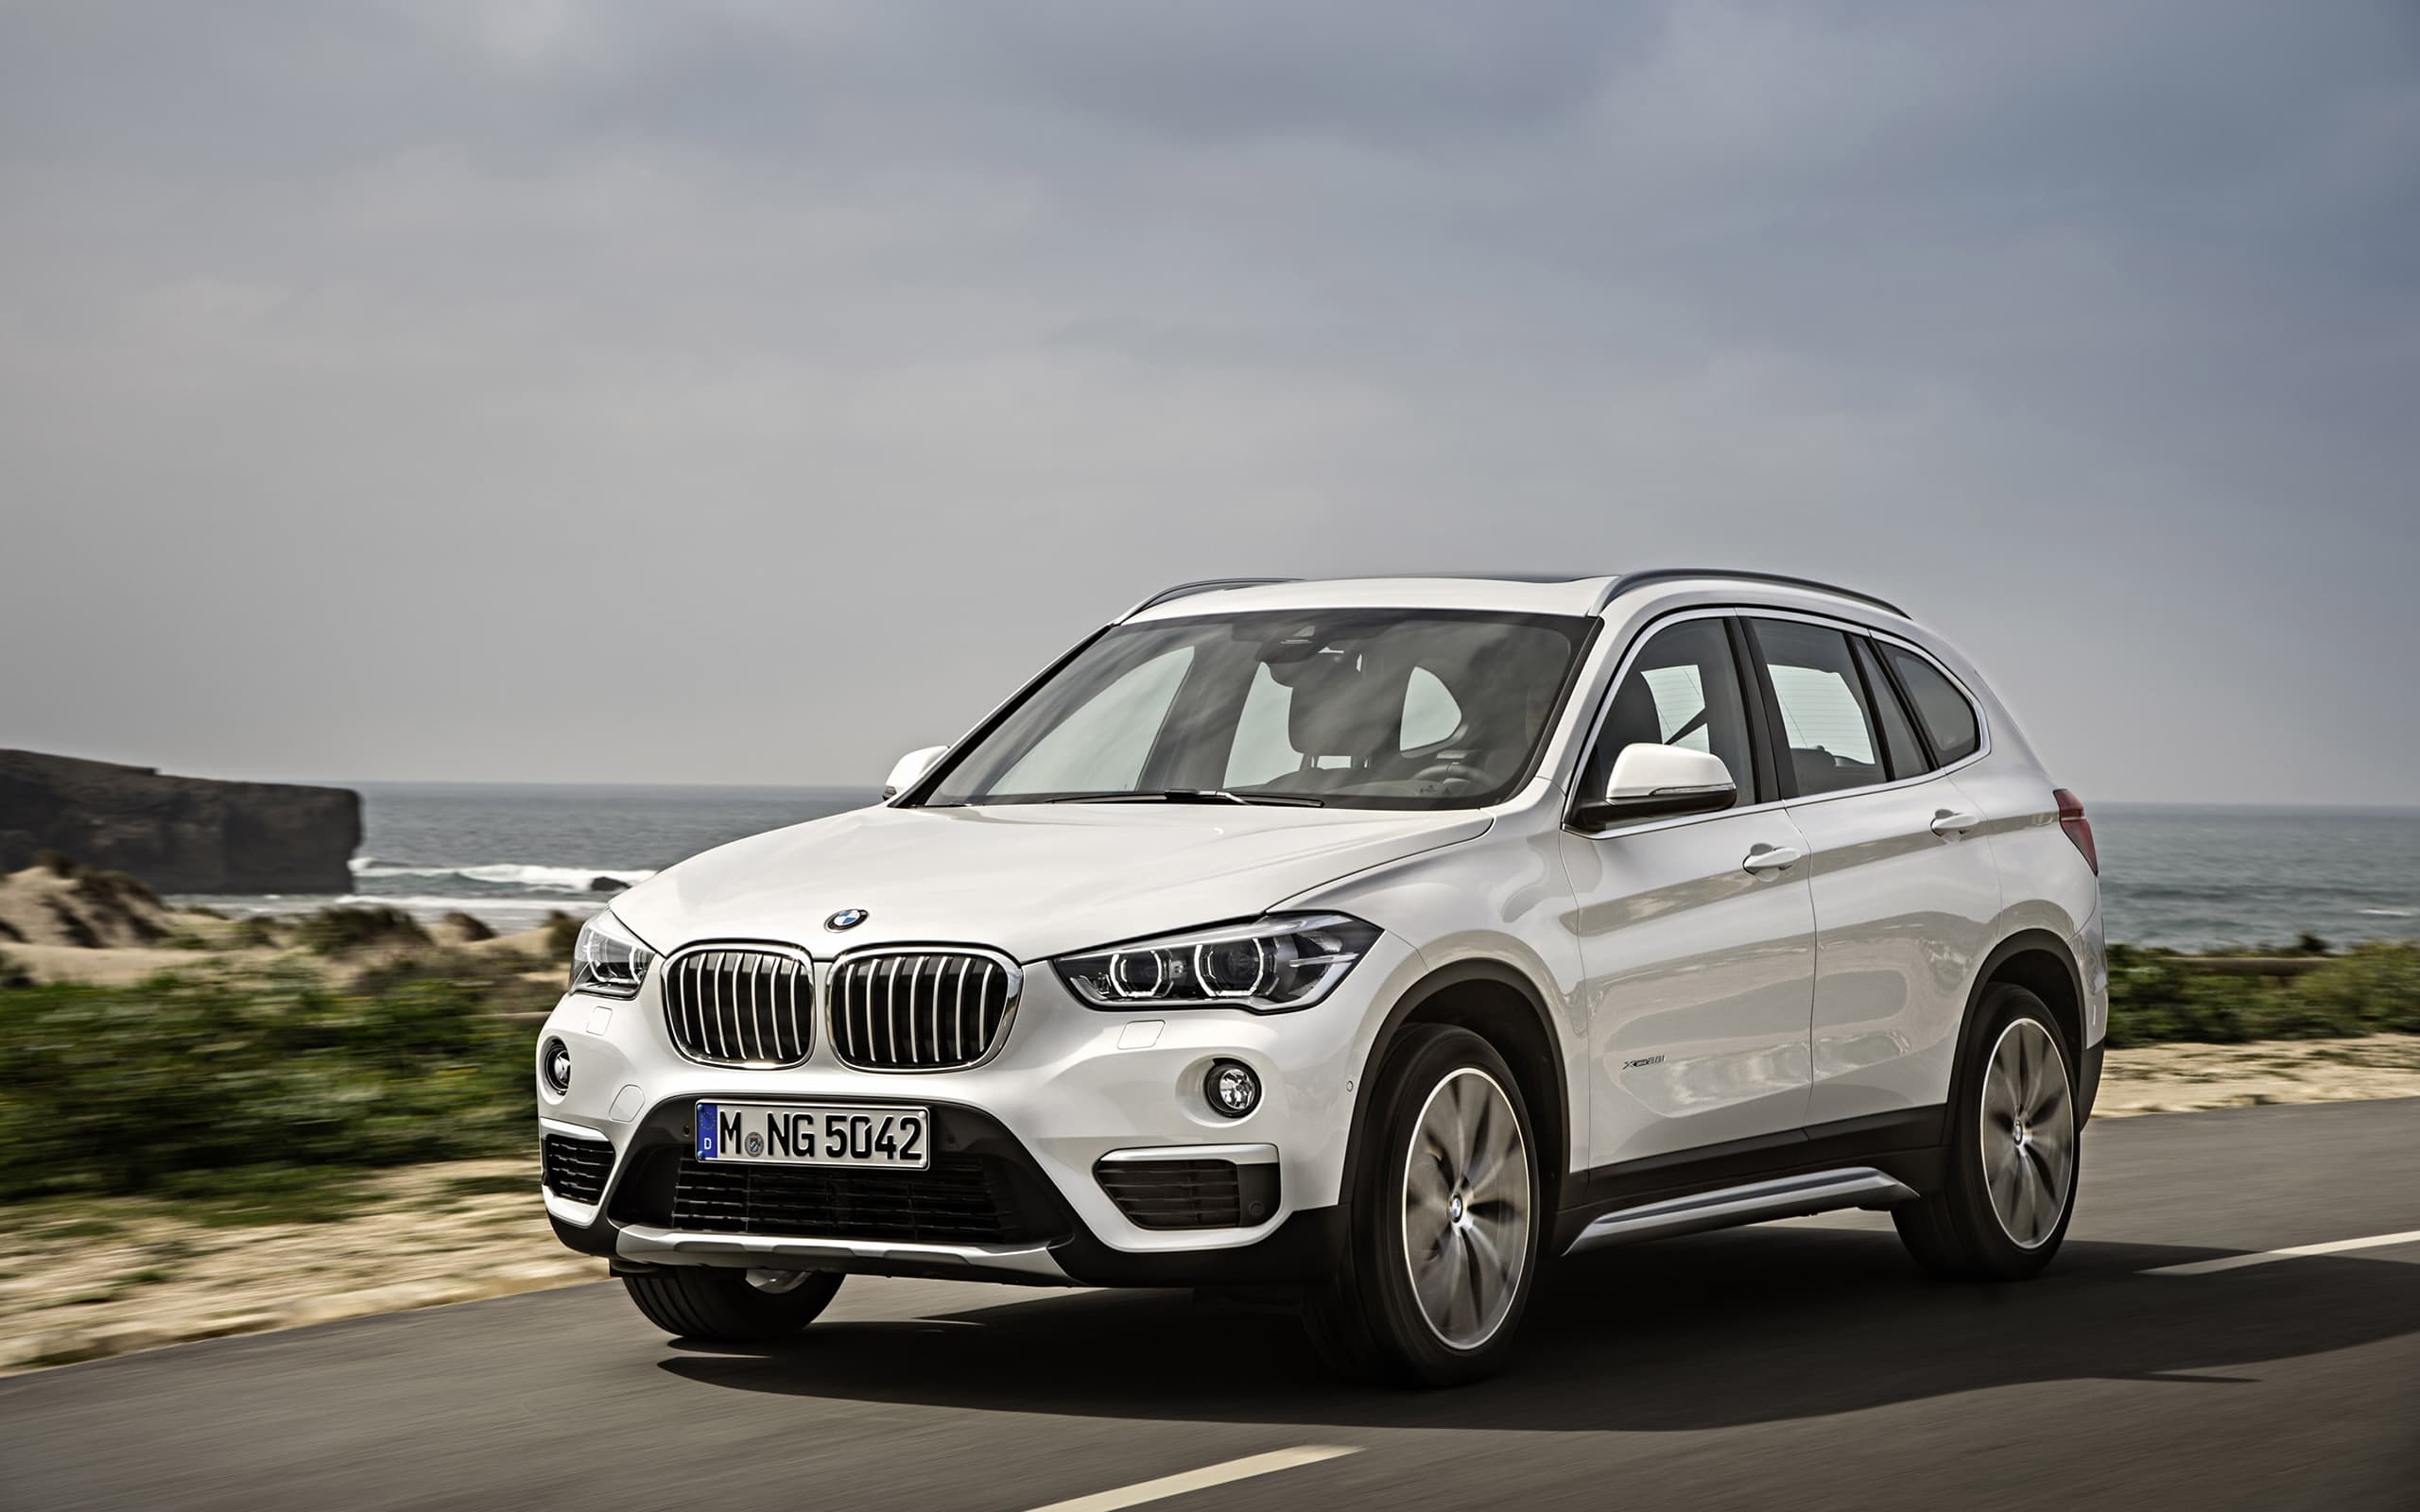 Bmw X1 2016 Wallpapers - 2018 Bmw X1 Msrp , HD Wallpaper & Backgrounds